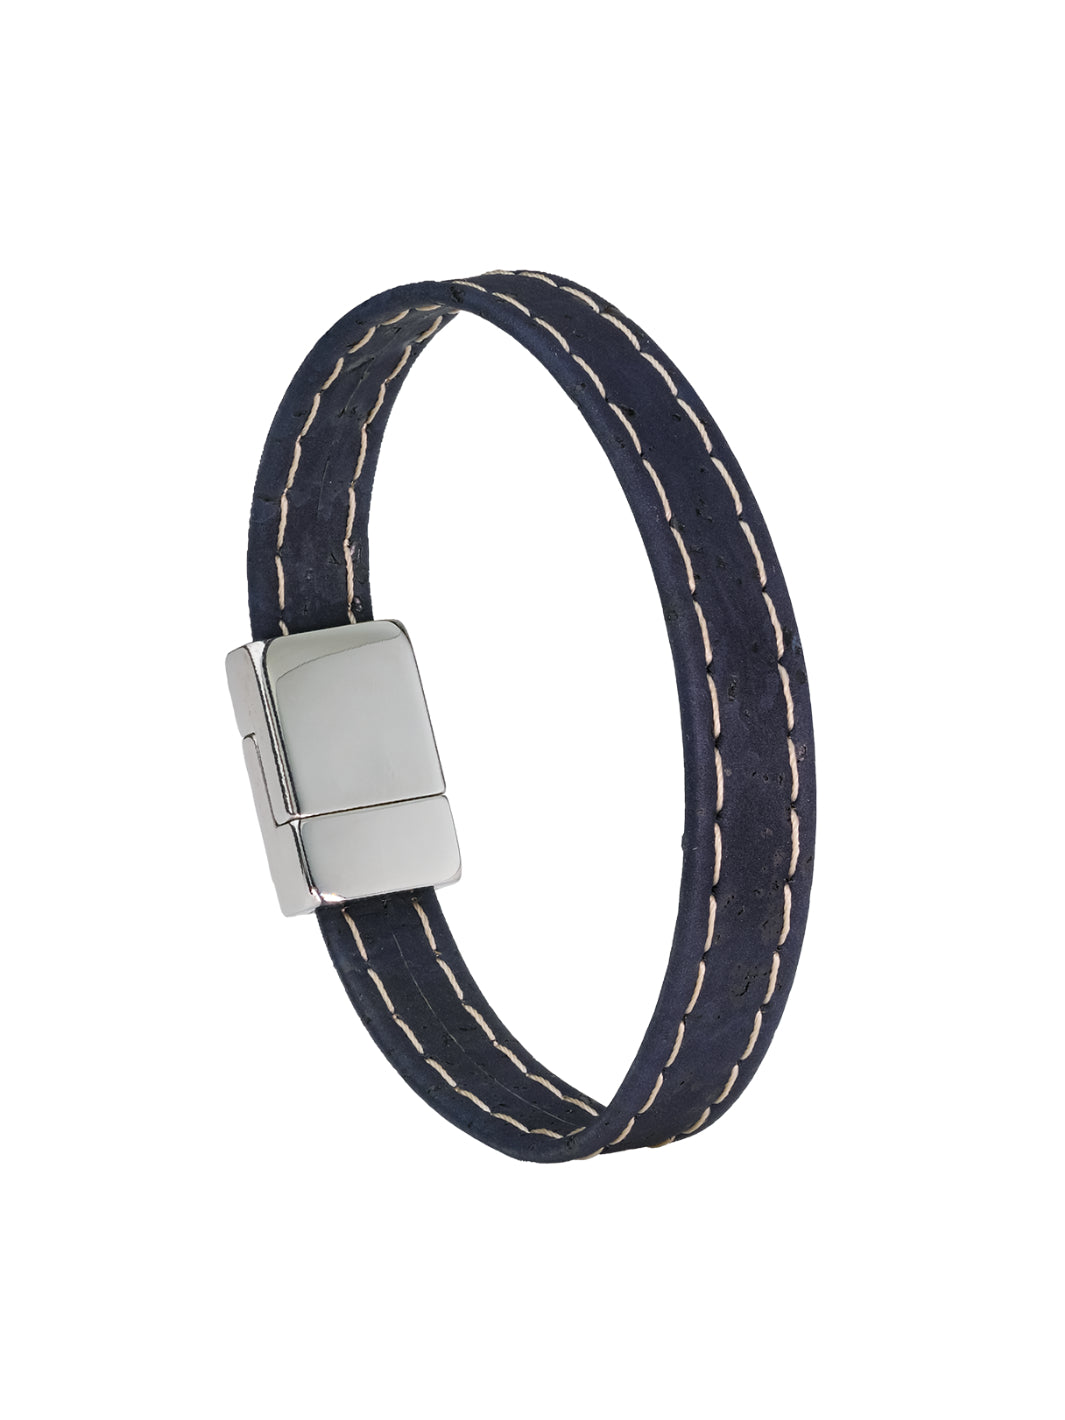 Introducing Maritime Elegance Embroidered Cork Bracelet: Navy-blue sophistication meets modern design. Lightweight, magnetic clasp, and elegantly packaged for any occasion.